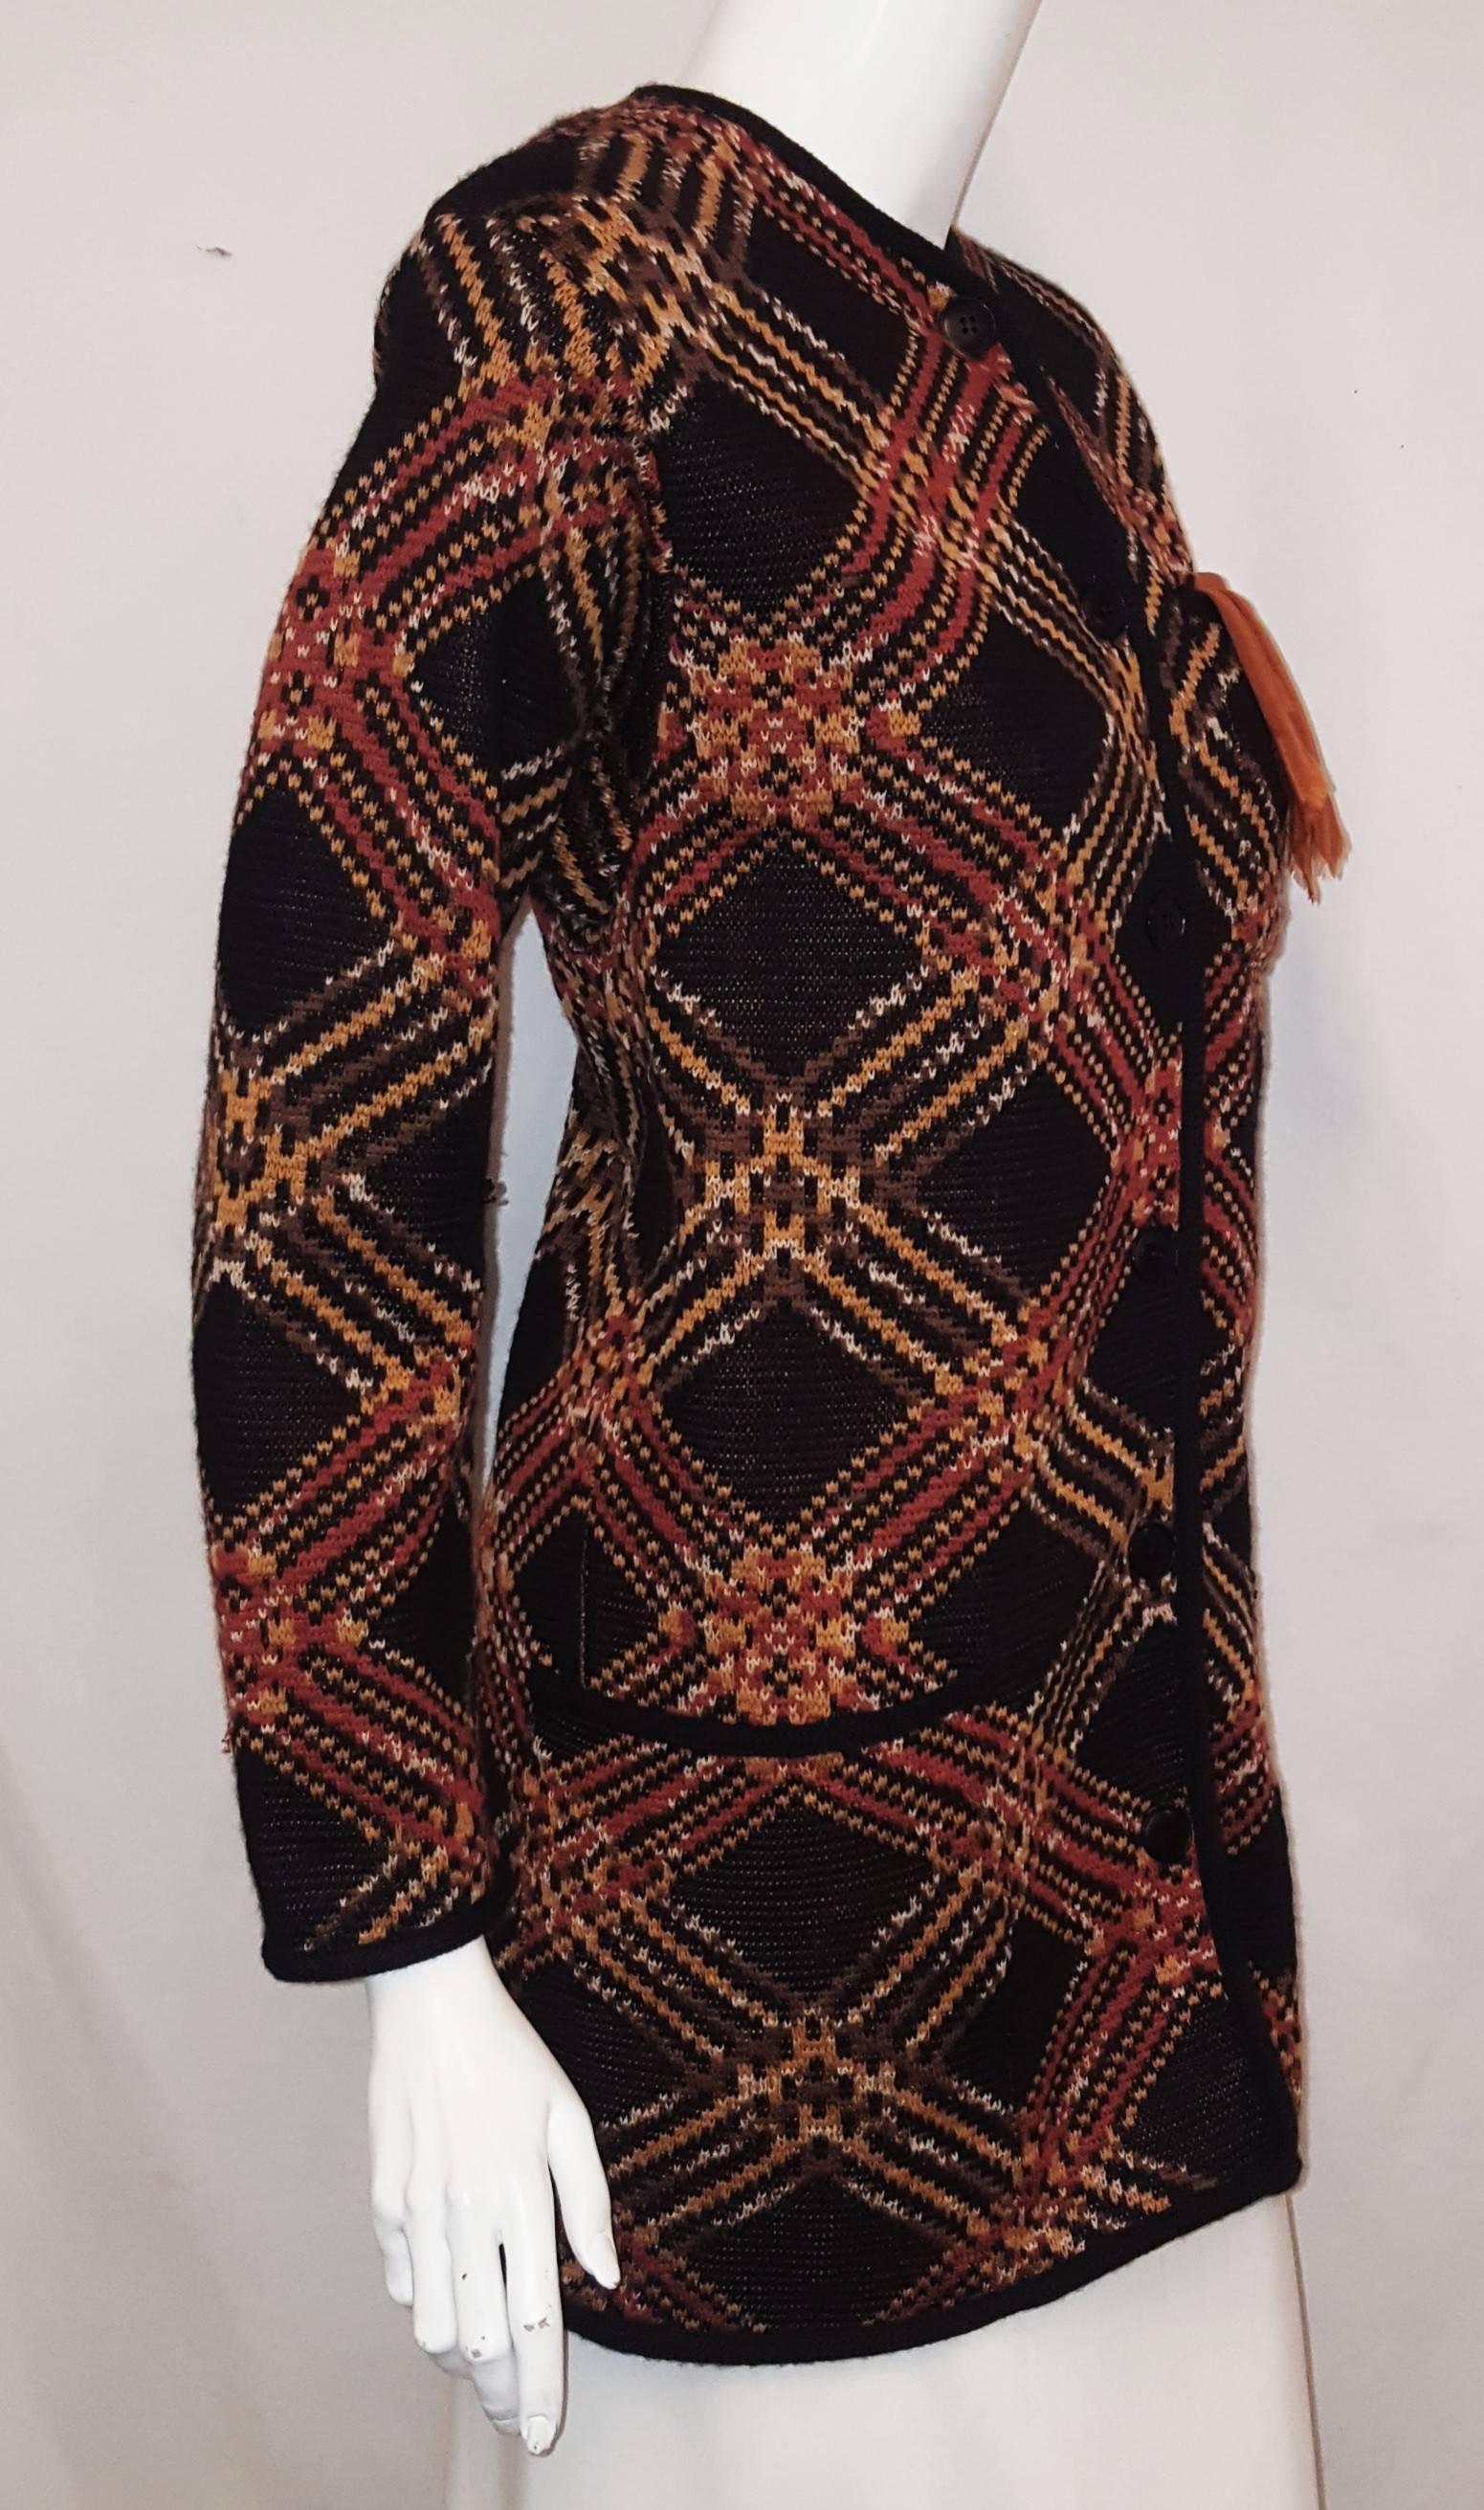 Saint Laurent Rive Gauche Wool Multi Knitted Long Jacket  In Excellent Condition For Sale In Palm Beach, FL